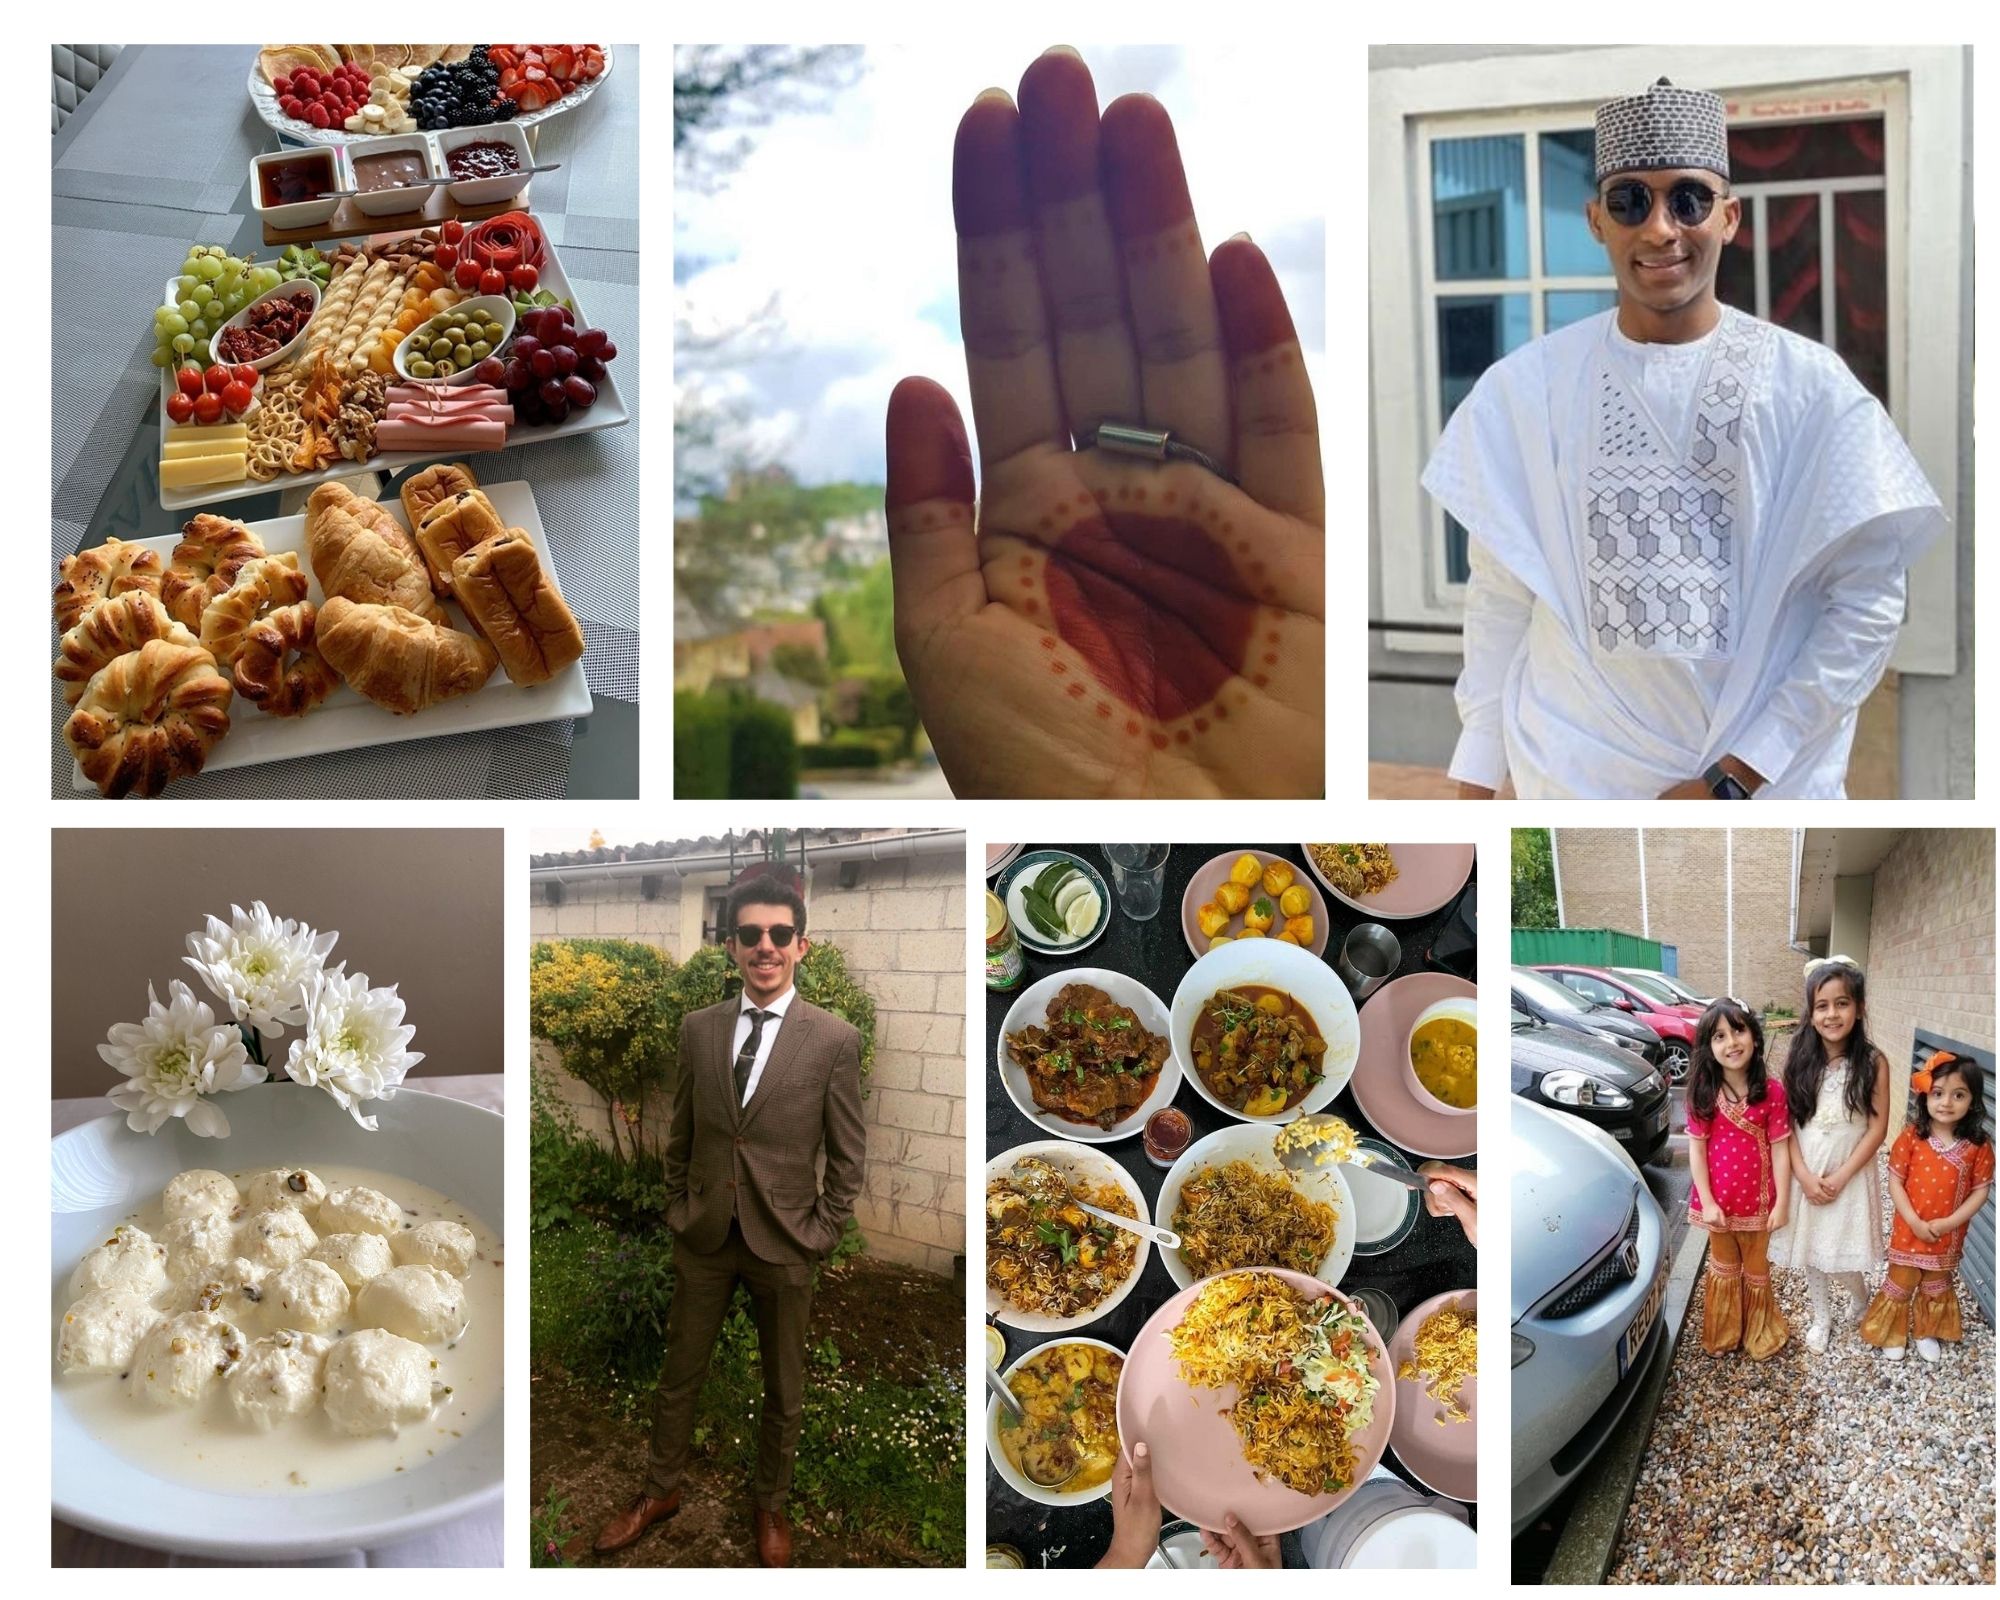 Kent students have been celebrating Eid, costumes, food and henna.